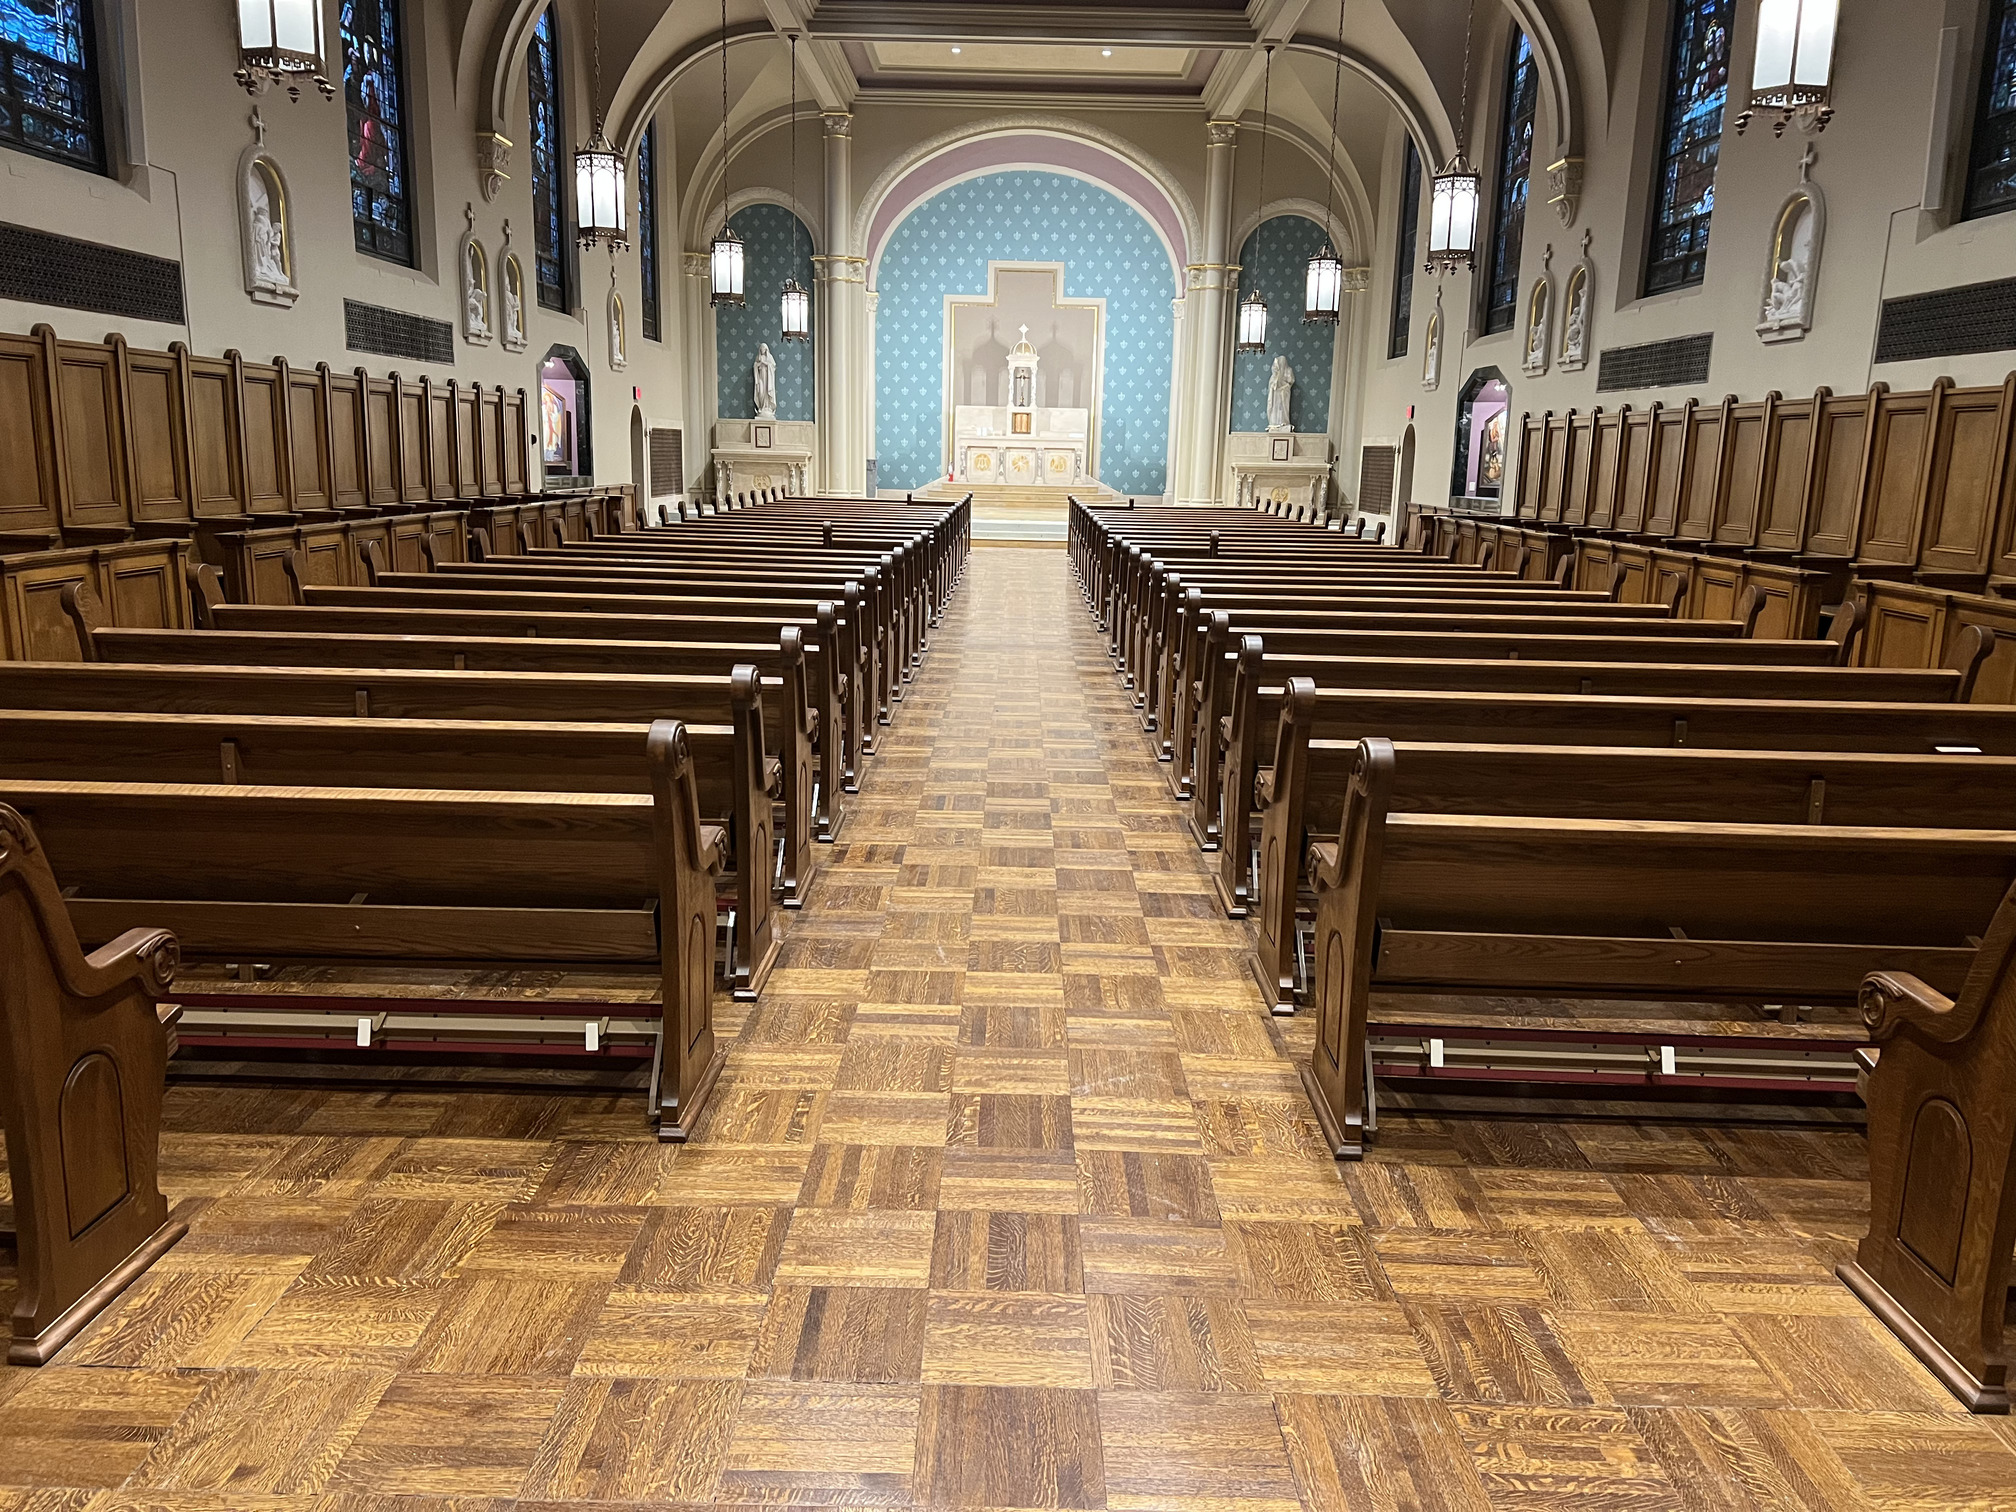 rear centter aisle view of newly refinished pews at Duchesne Academy in Omaha, Nebraska. Refinishing by Woods Church Interiors